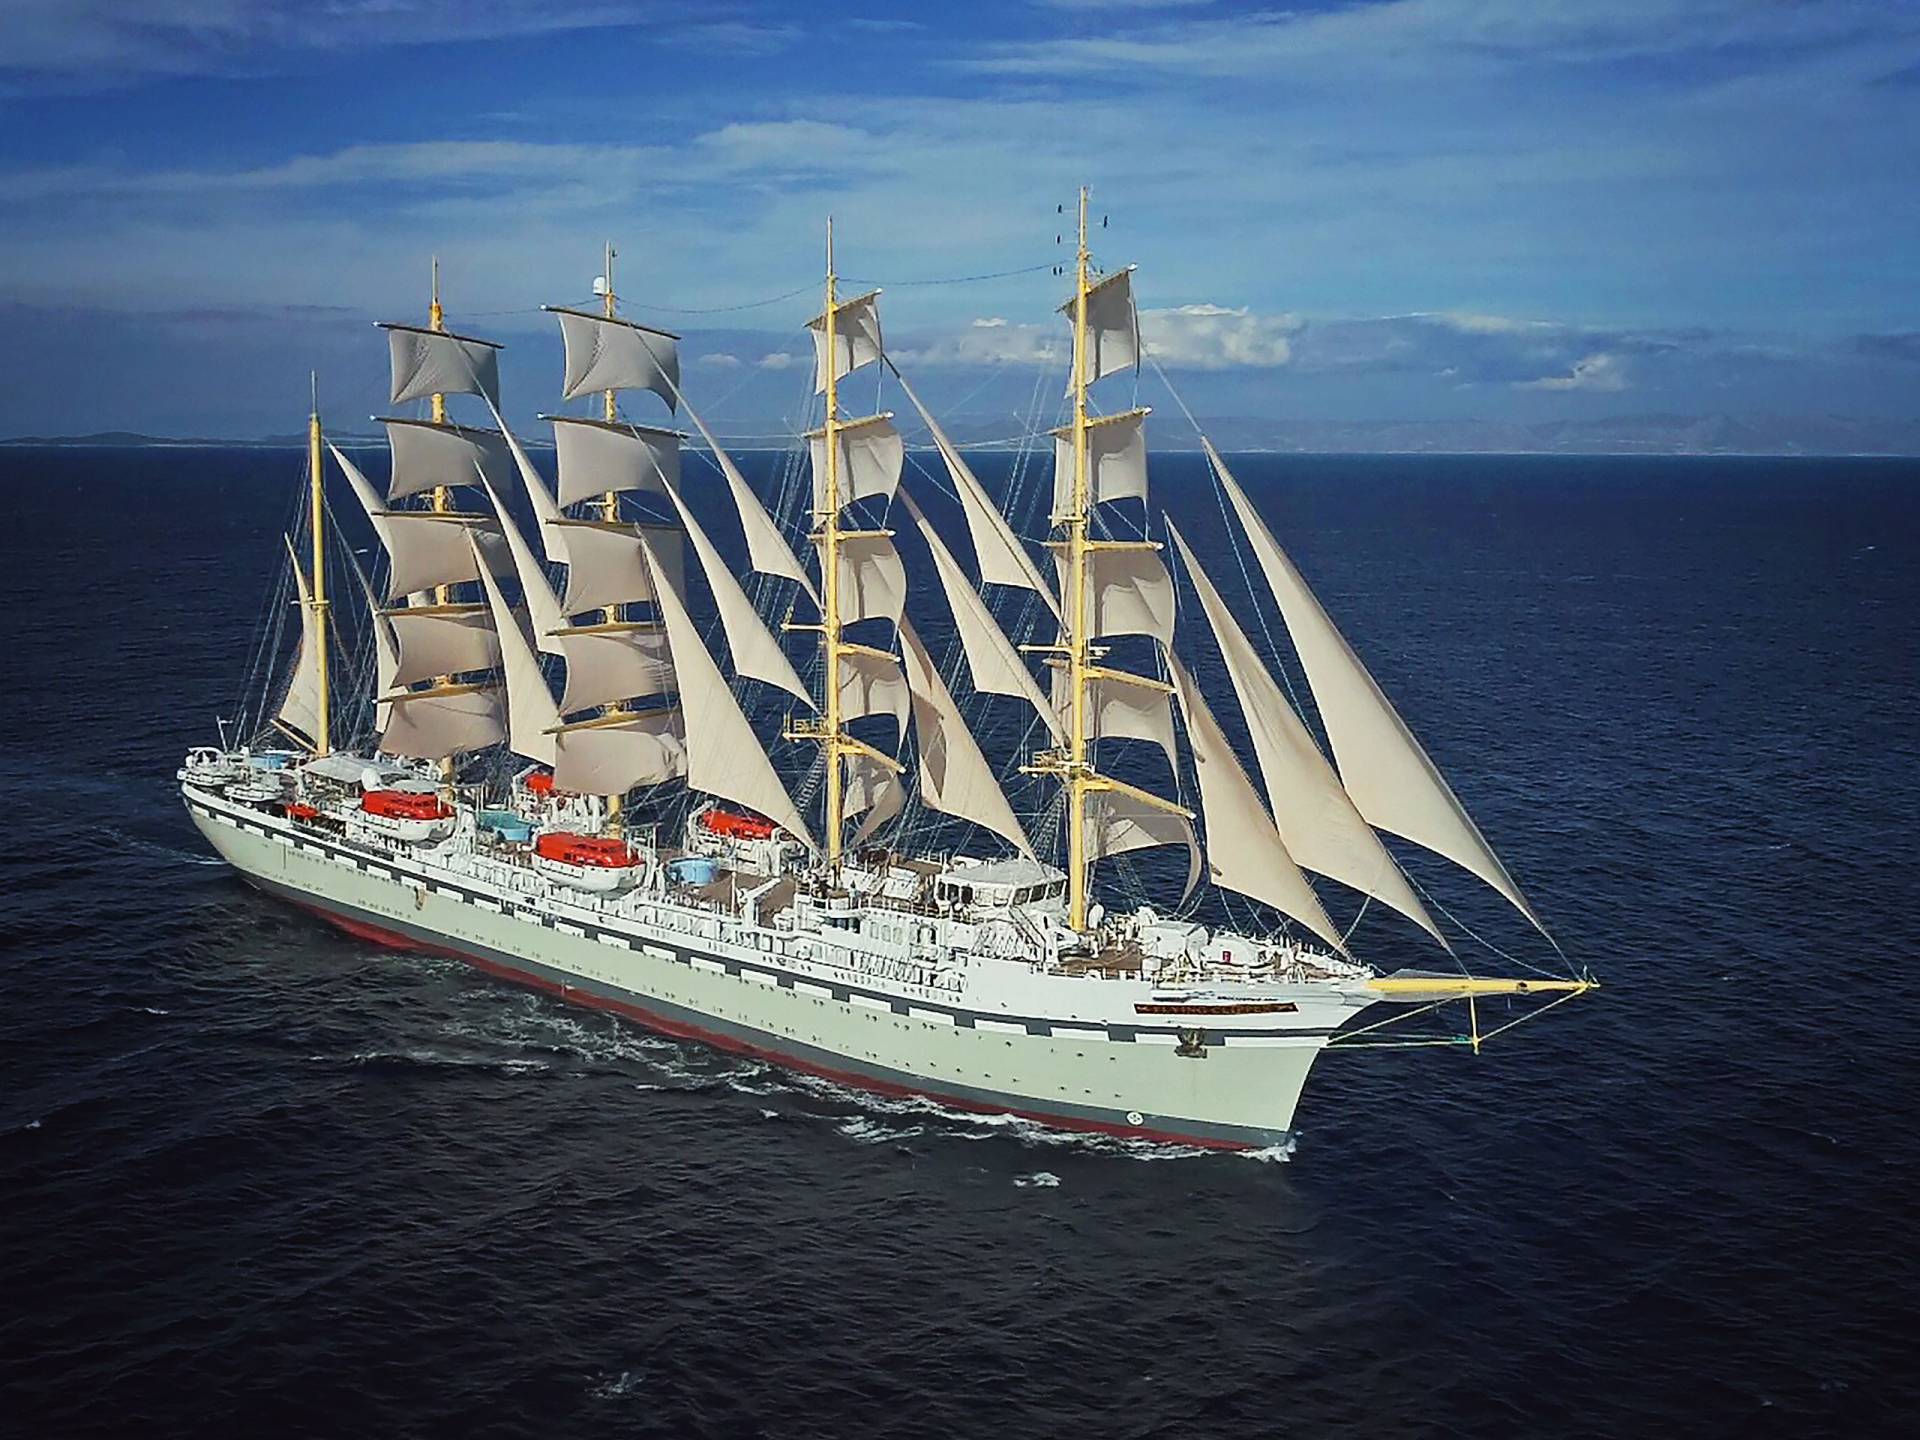 PHOTOS: World's largest sailing ship built in Split in full sail